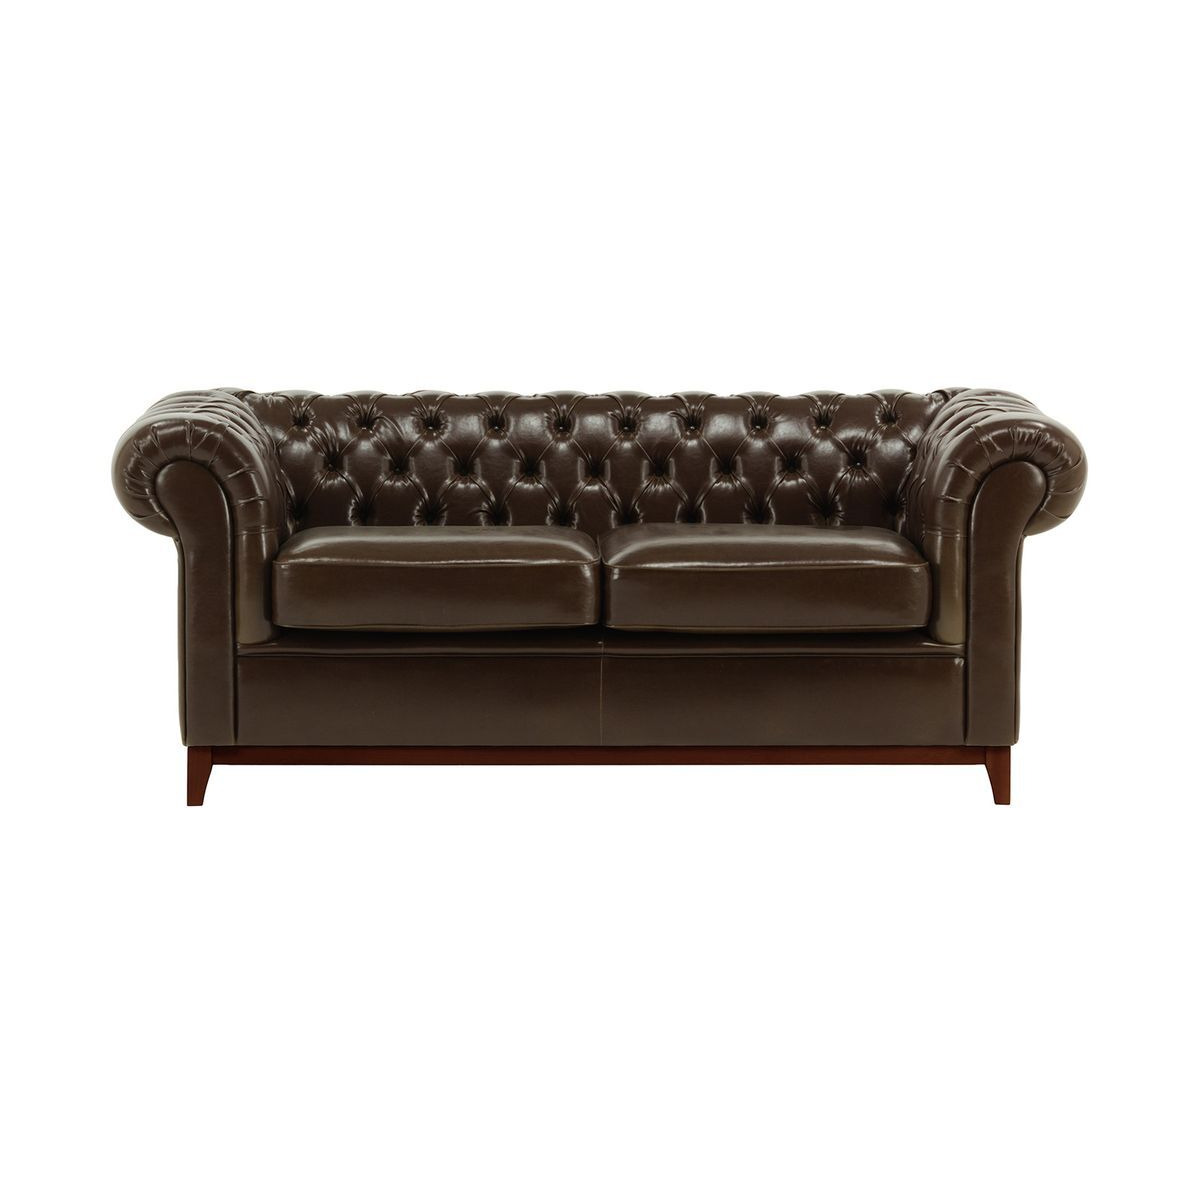 Chesterfield Wood 3 Seater Sofa in Vegan Leather, antracite, Leg colour: wax black - image 1